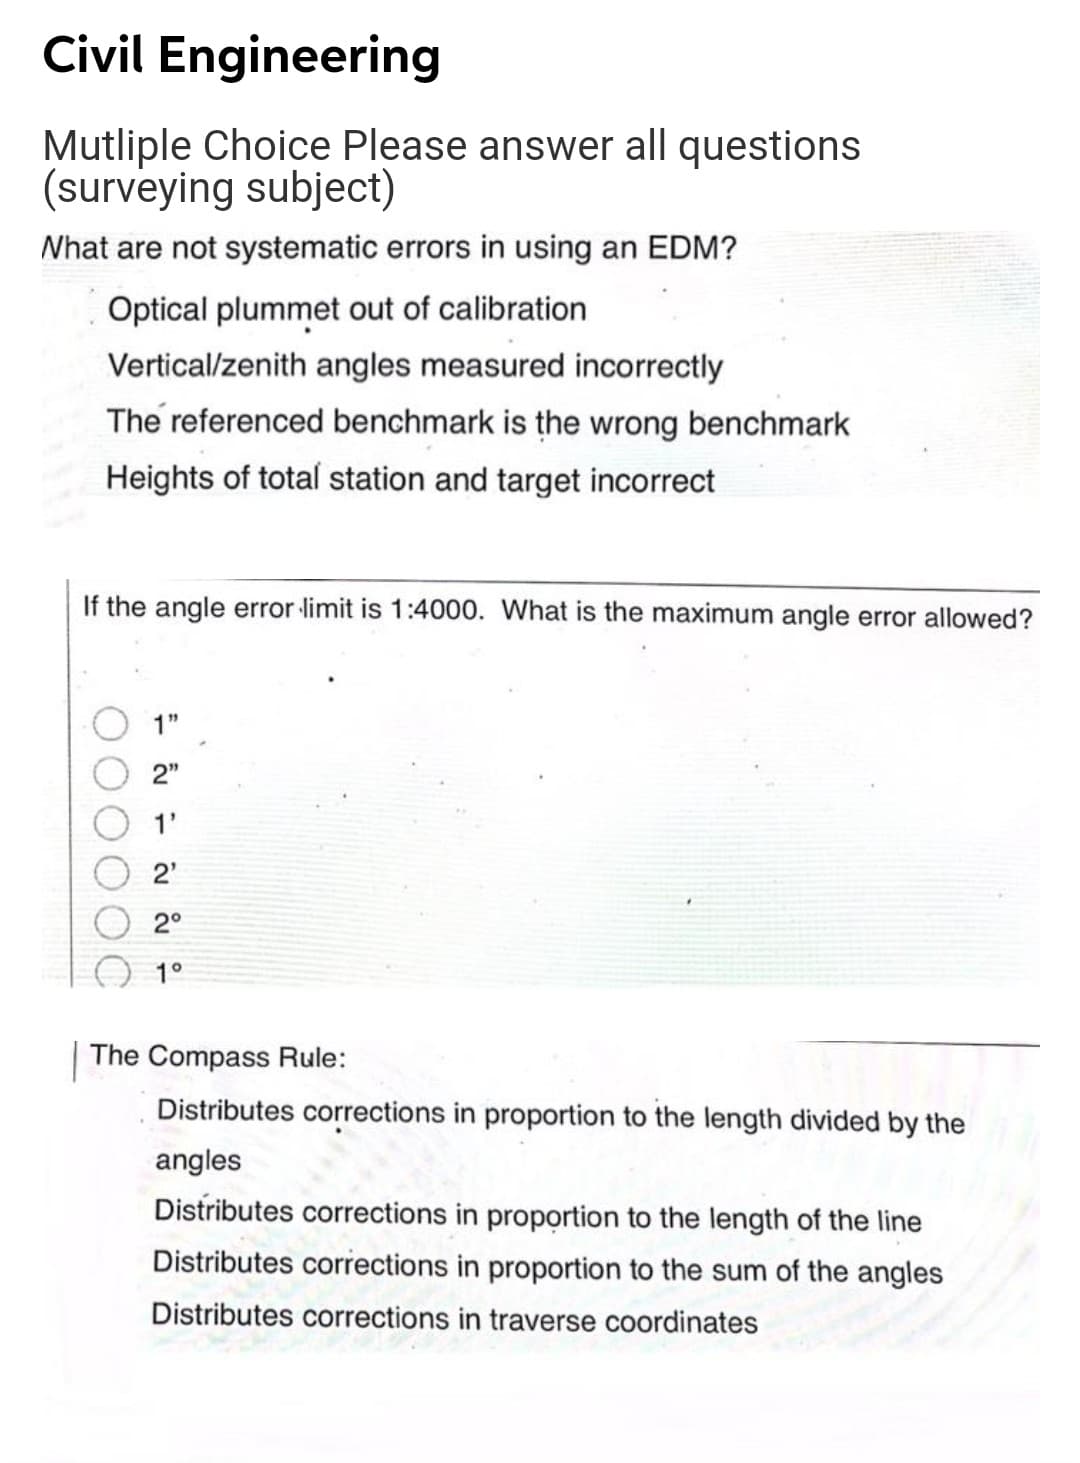 Civil Engineering
Mutliple Choice Please answer all questions
(surveying subject)
Nhat are not systematic errors in using an EDM?
Optical plummet out of calibration
Vertical/zenith angles measured incorrectly
The referenced benchmark is the wrong benchmark
Heights of total station and target incorrect
If the angle error limit is 1:4000. What is the maximum angle error allowed?
1"
2"
1'
2'
2°
1°
|The Compass Rule:
Distributes corrections in proportion to the length divided by the
angles
Distributes corrections in proportion to the length of the line
Distributes corrections in proportion to the sum of the angles
Distributes corrections in traverse coordinates
